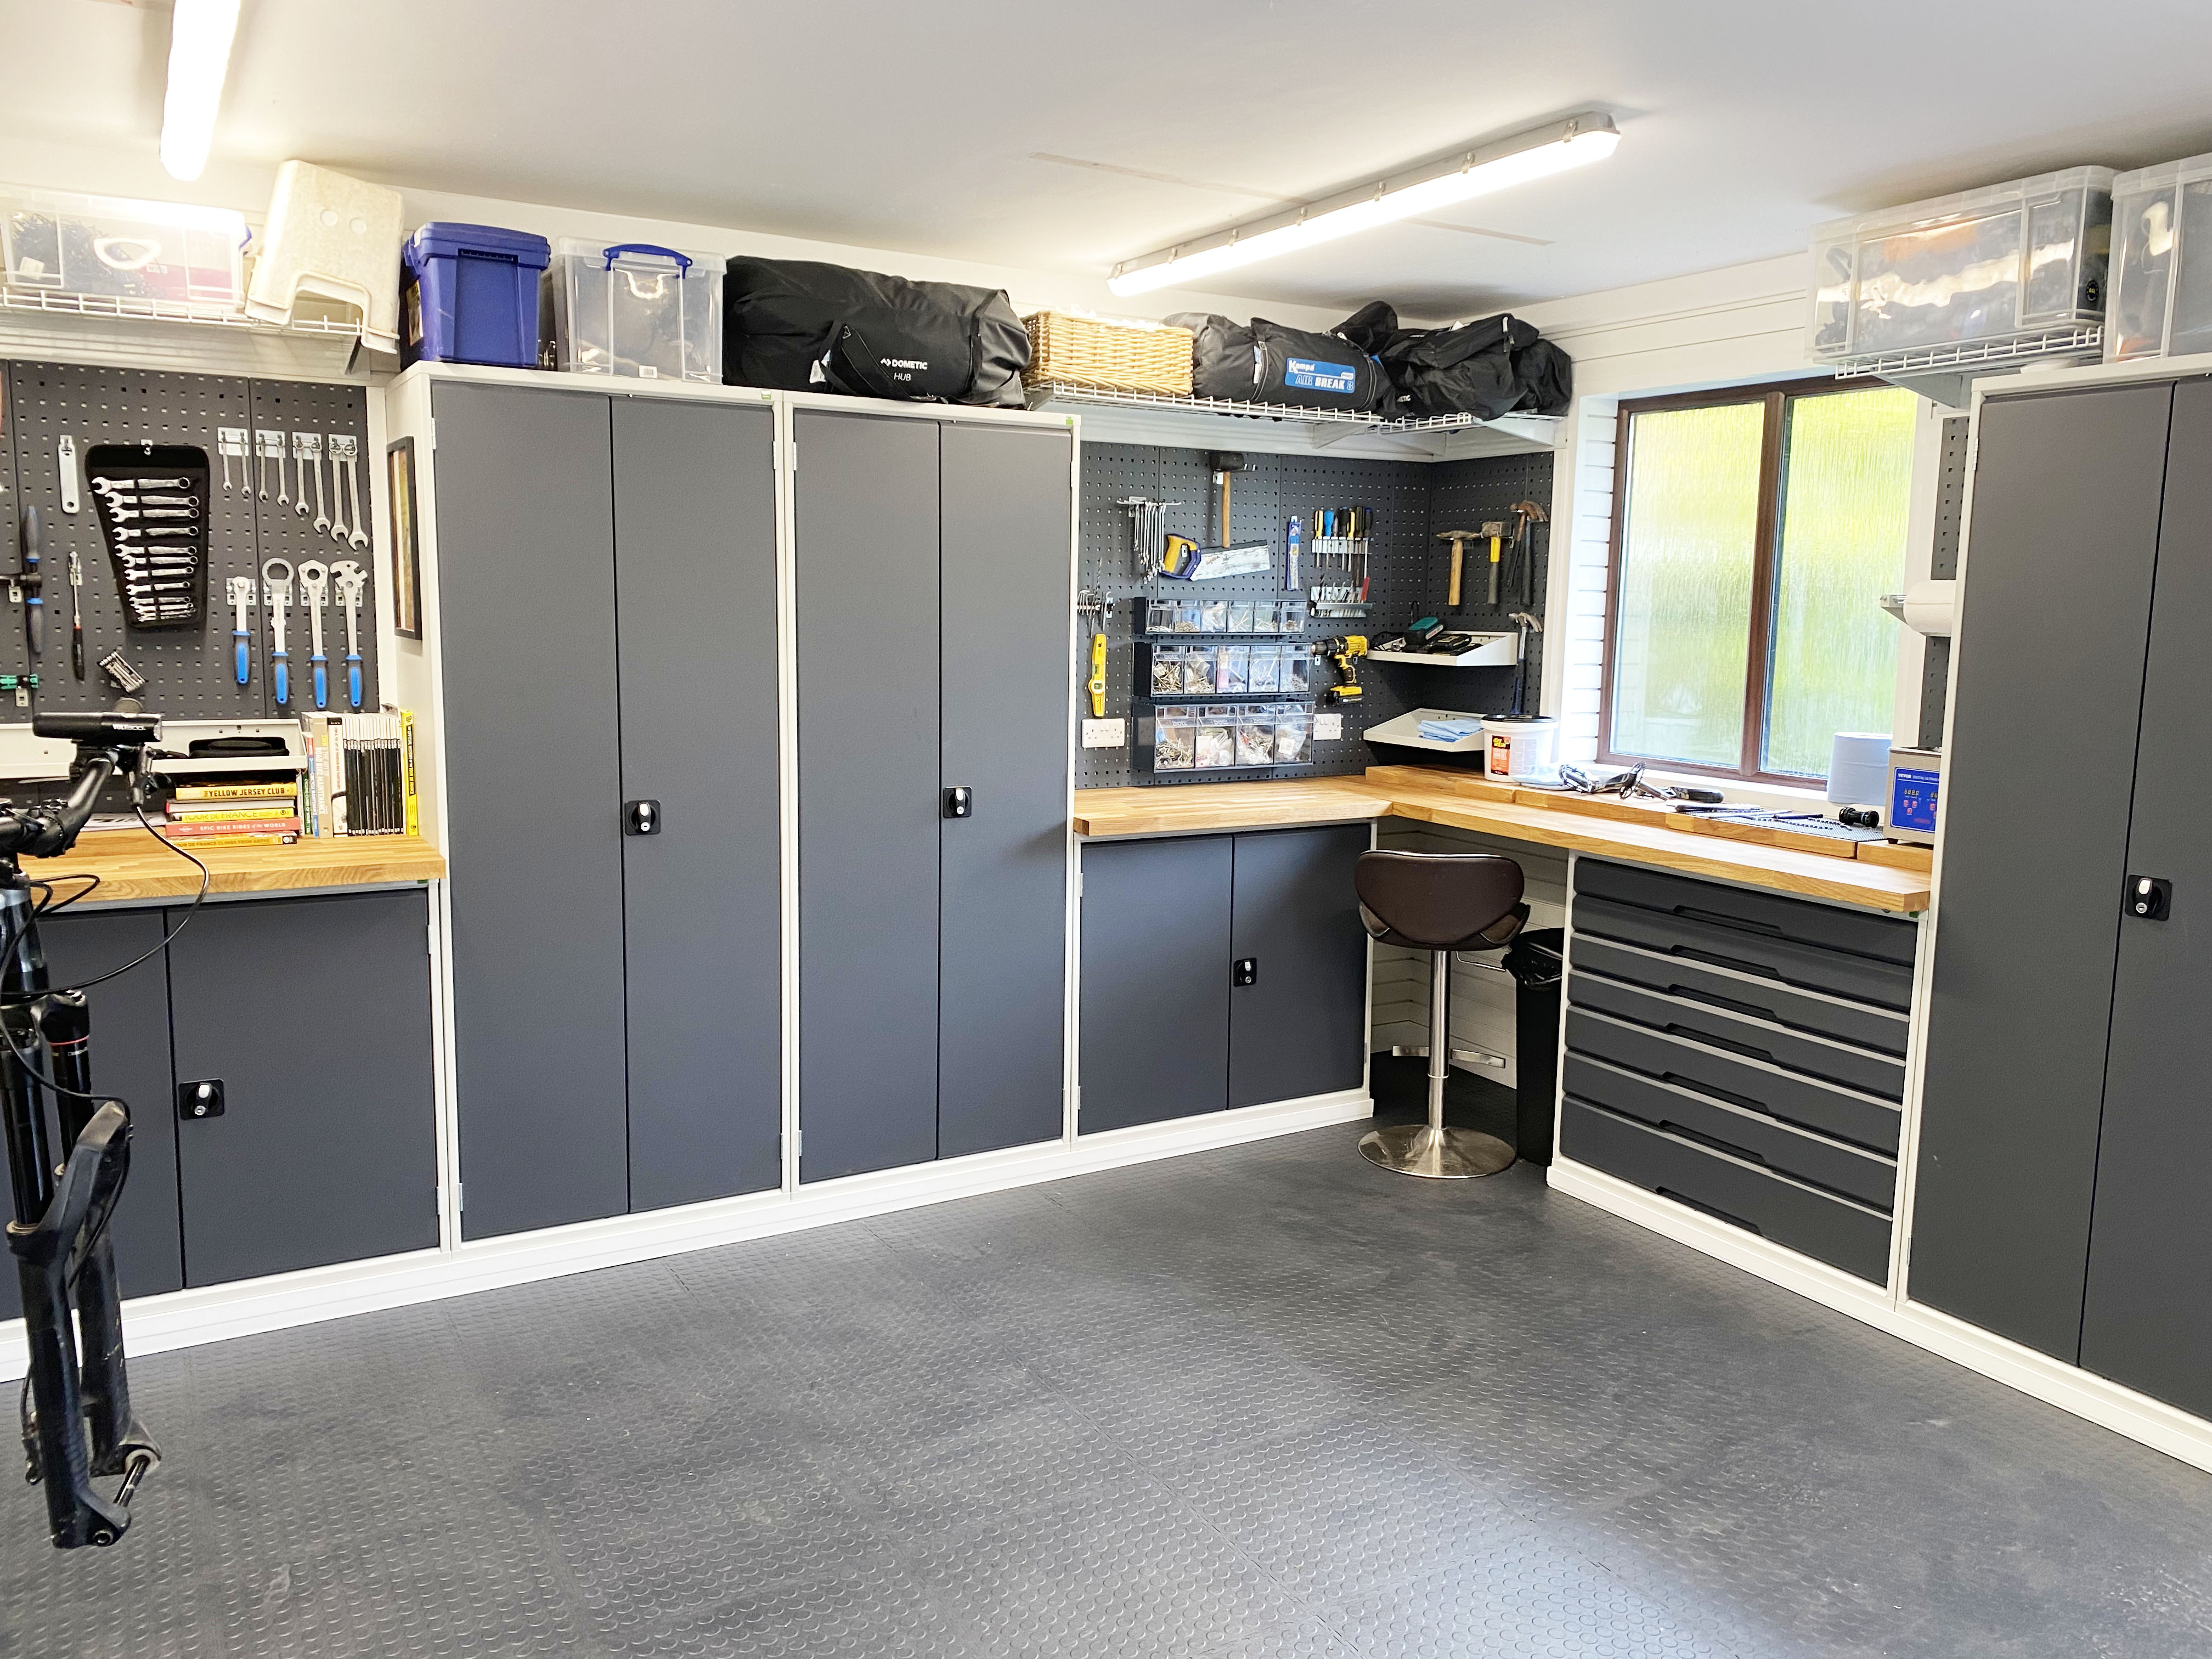 10 benefits to installing metal storage cabinets in your garage